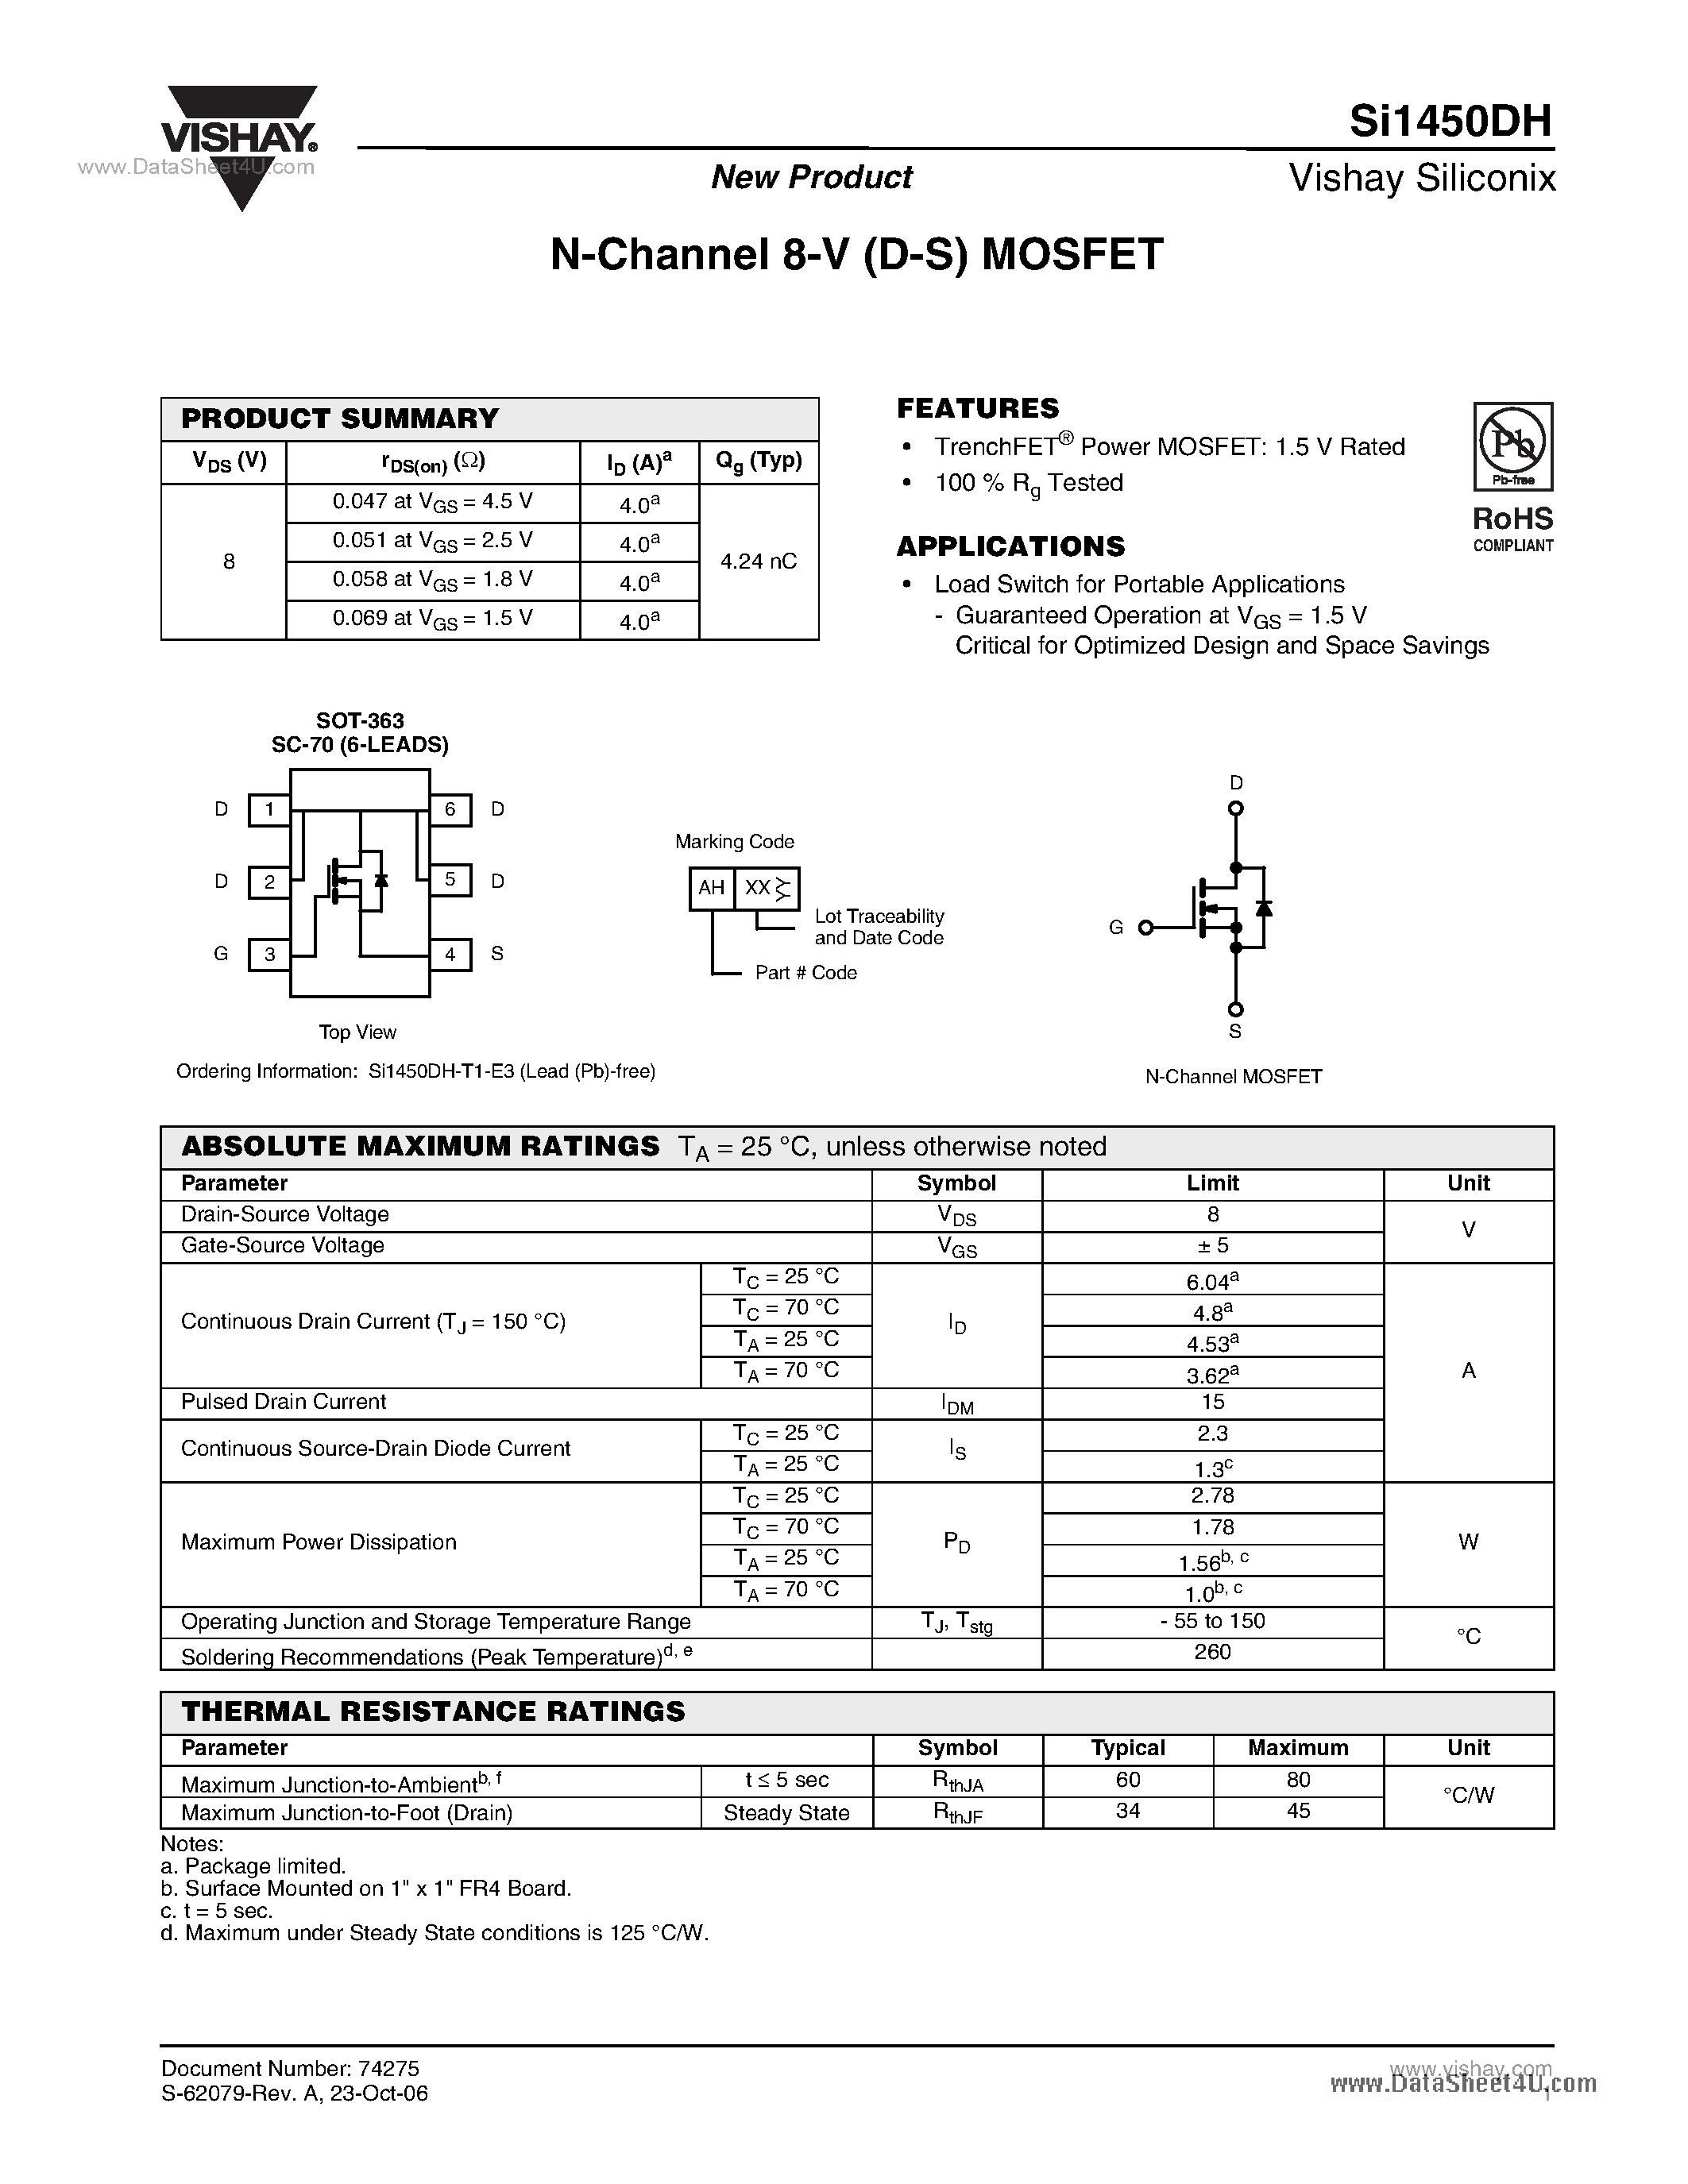 Даташит SI1450DH - N-Channel 8-V (D-S) MOSFET страница 1